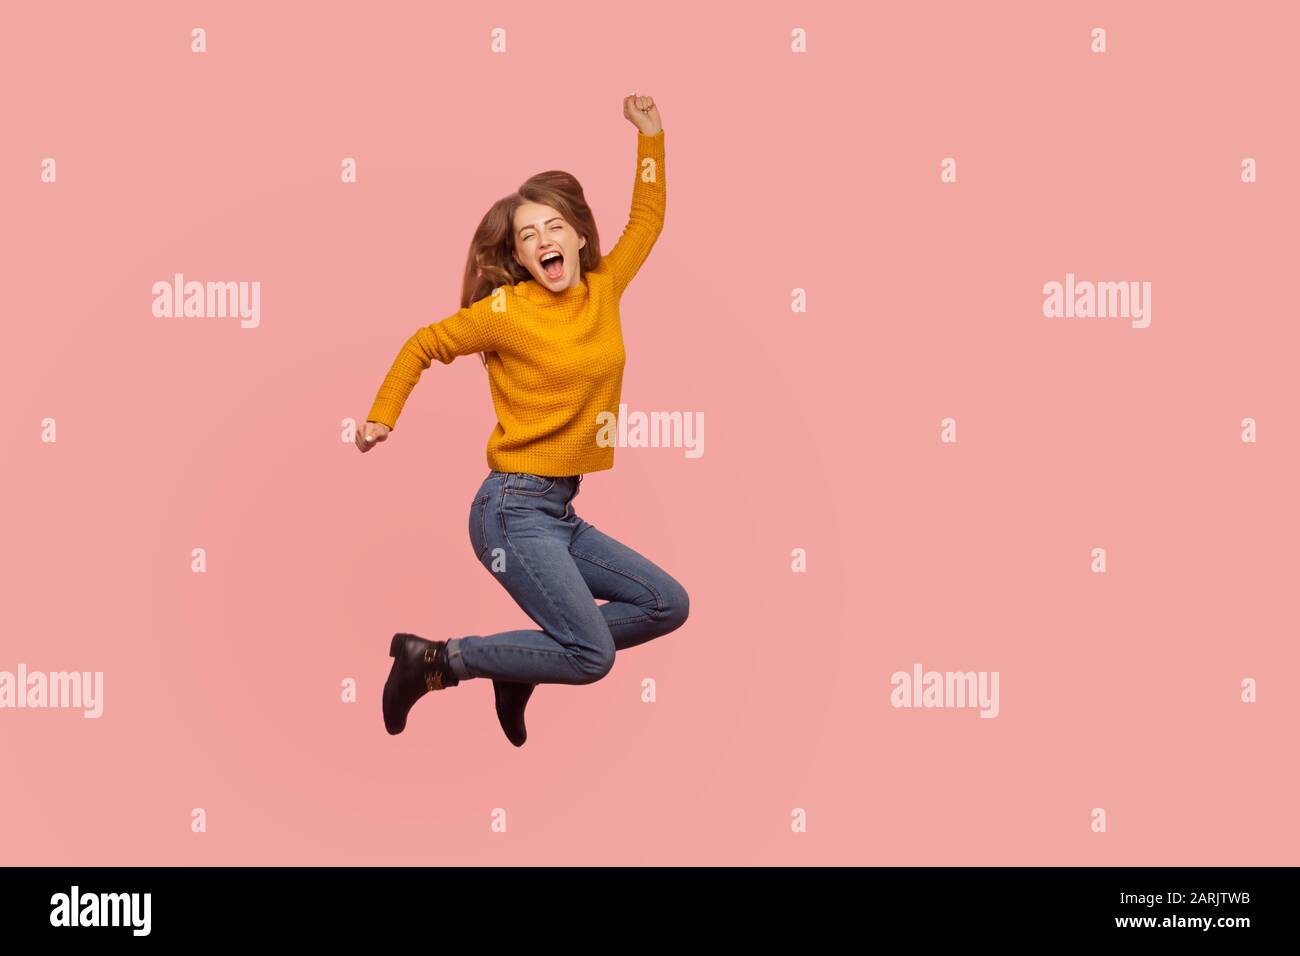 Vivid energetic ginger girl in sweater and denim jumping in air or flying up, shouting Yeah i did it, celebrating victory success, full of enthusiasm. Stock Photo